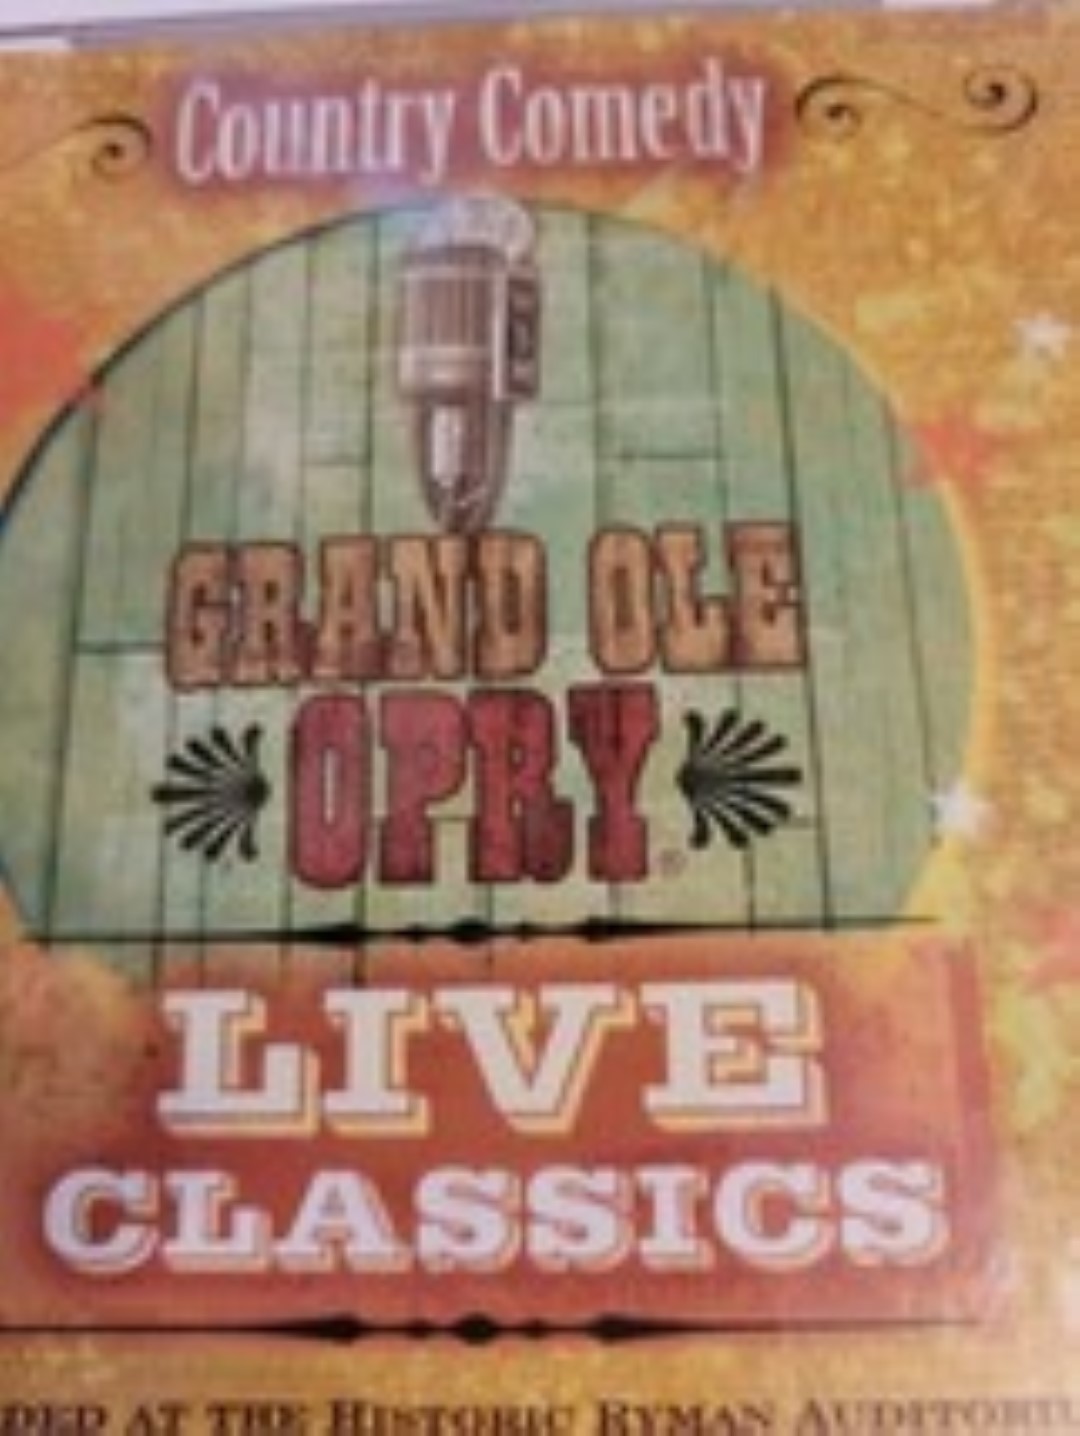 Grand ole opry live classics   country comedy  1  large 